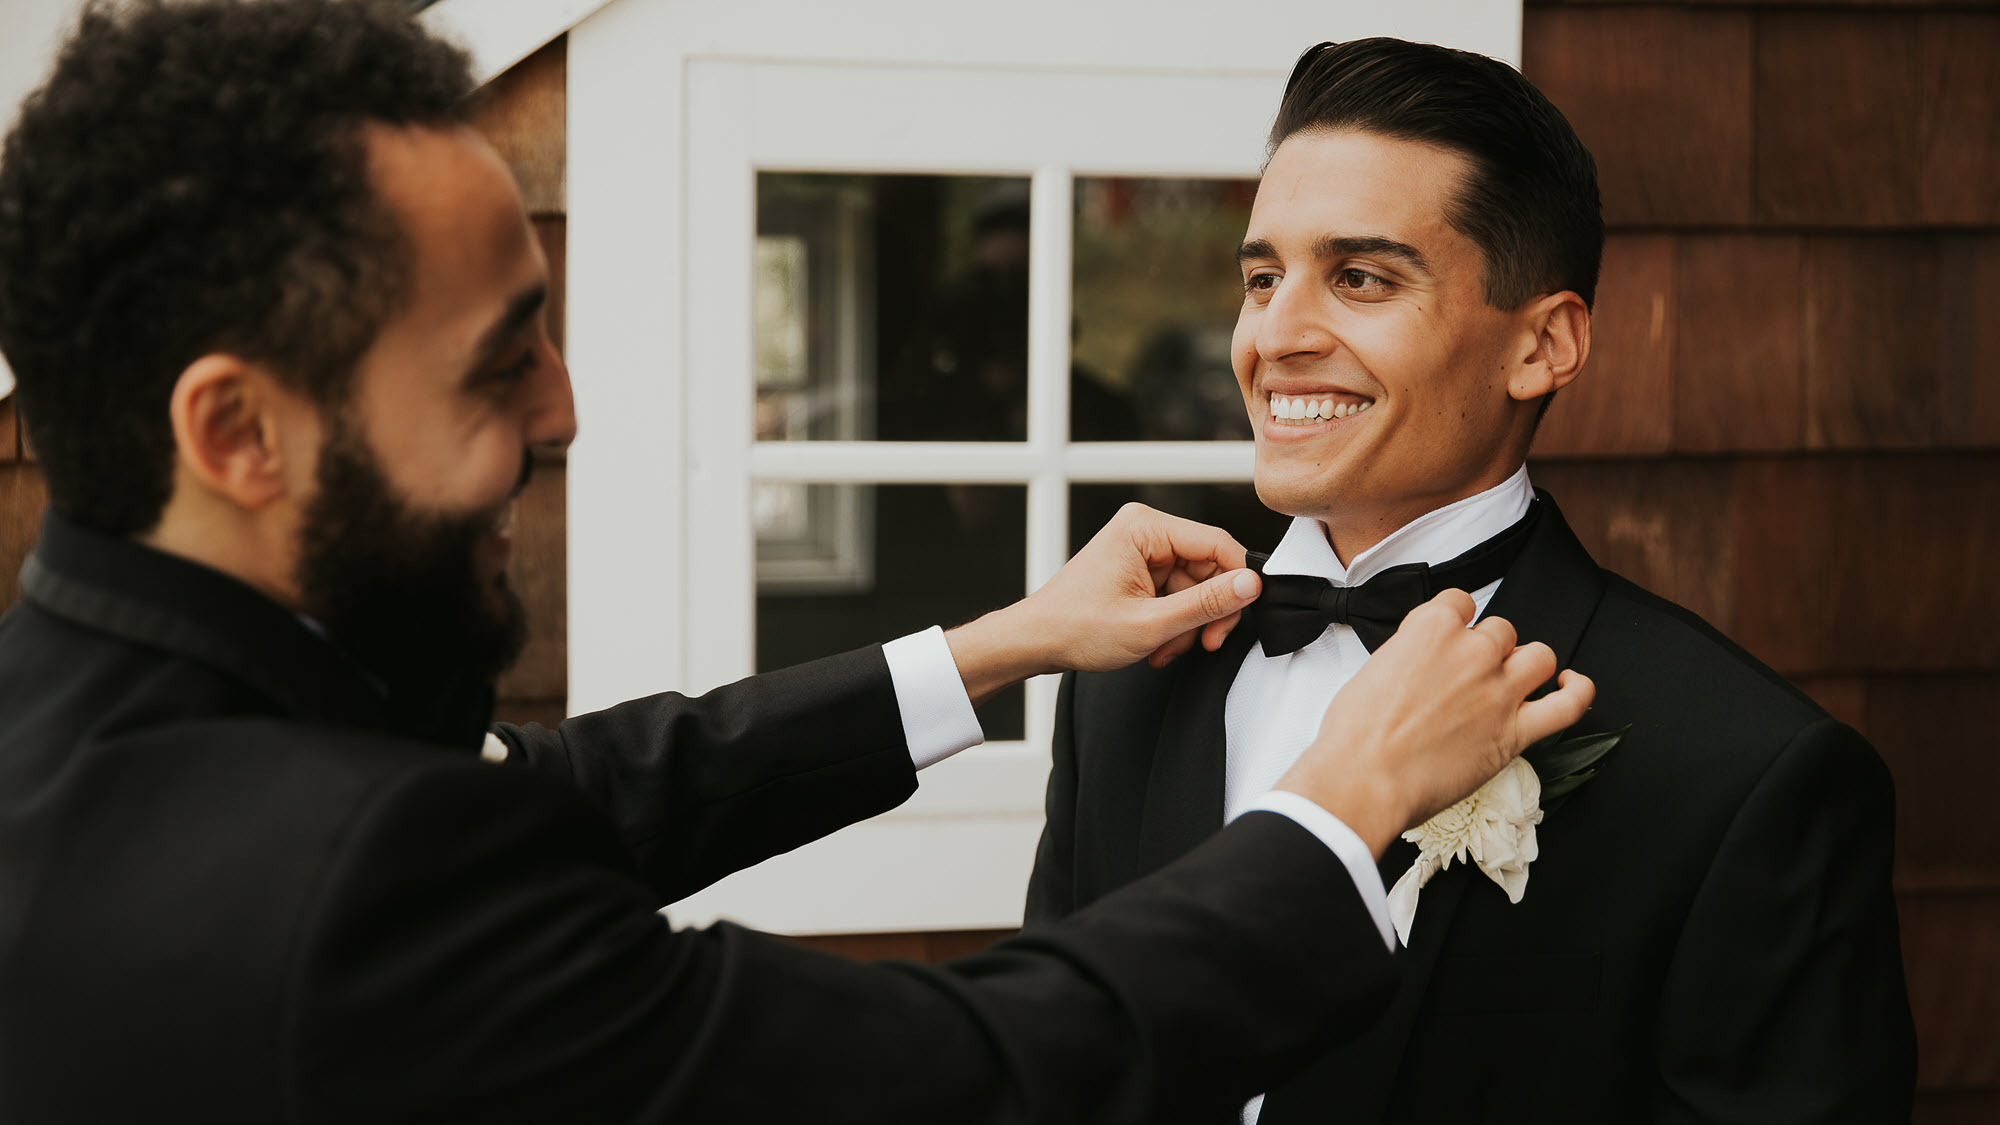 Groom's bowtie adjustment in a joyful pre-wedding ceremony moment at Zion Springs venue.